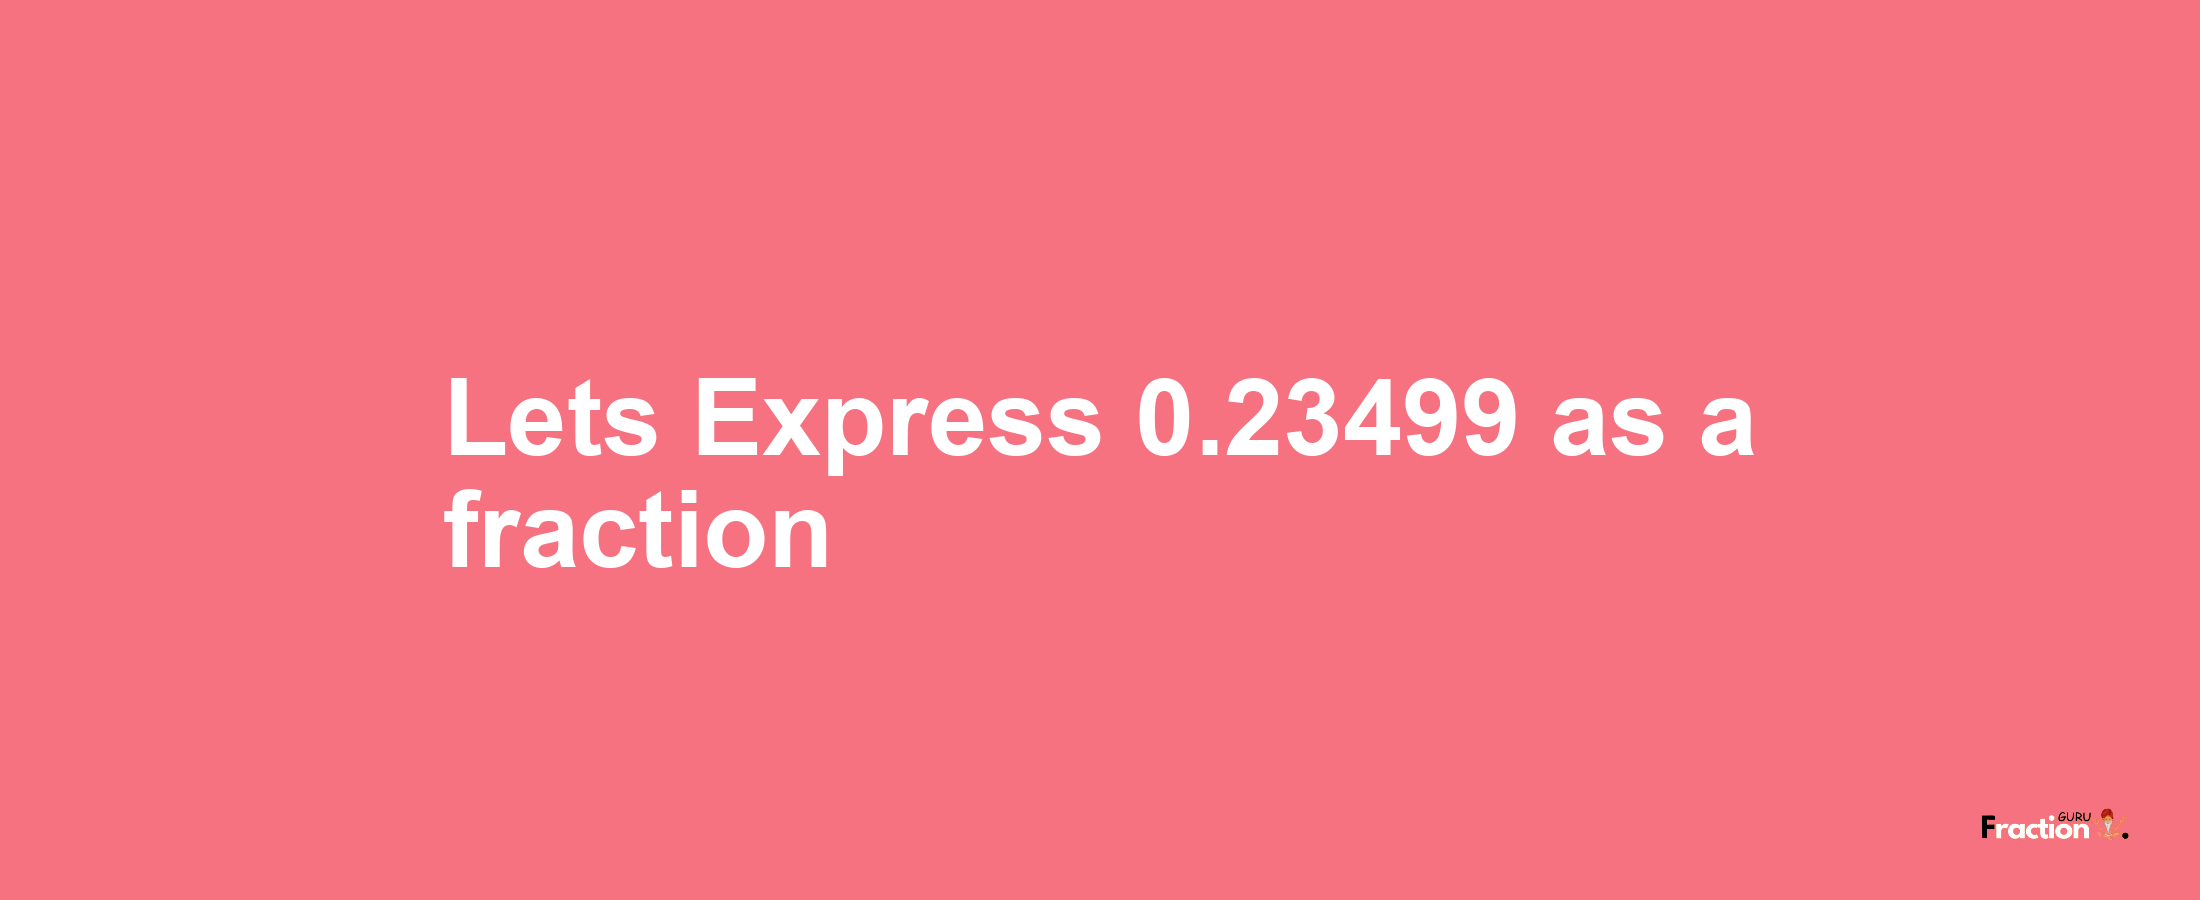 Lets Express 0.23499 as afraction